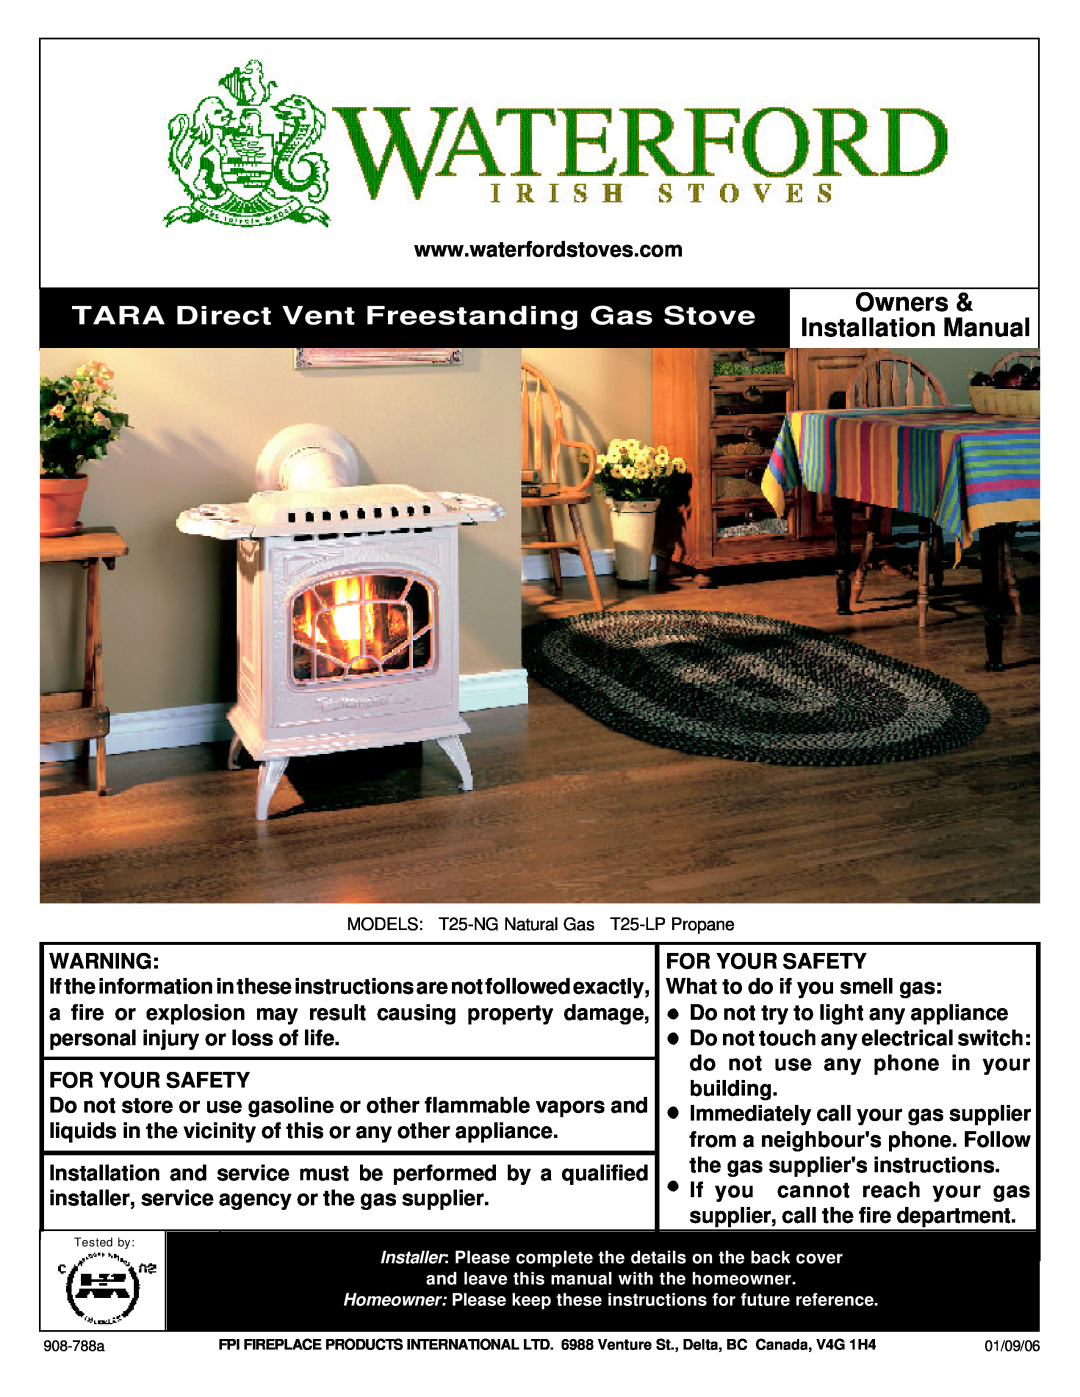 Waterford Appliances T25-LP installation manual TARA Direct Vent Freestanding Gas Stove, Owners & Installation Manual 